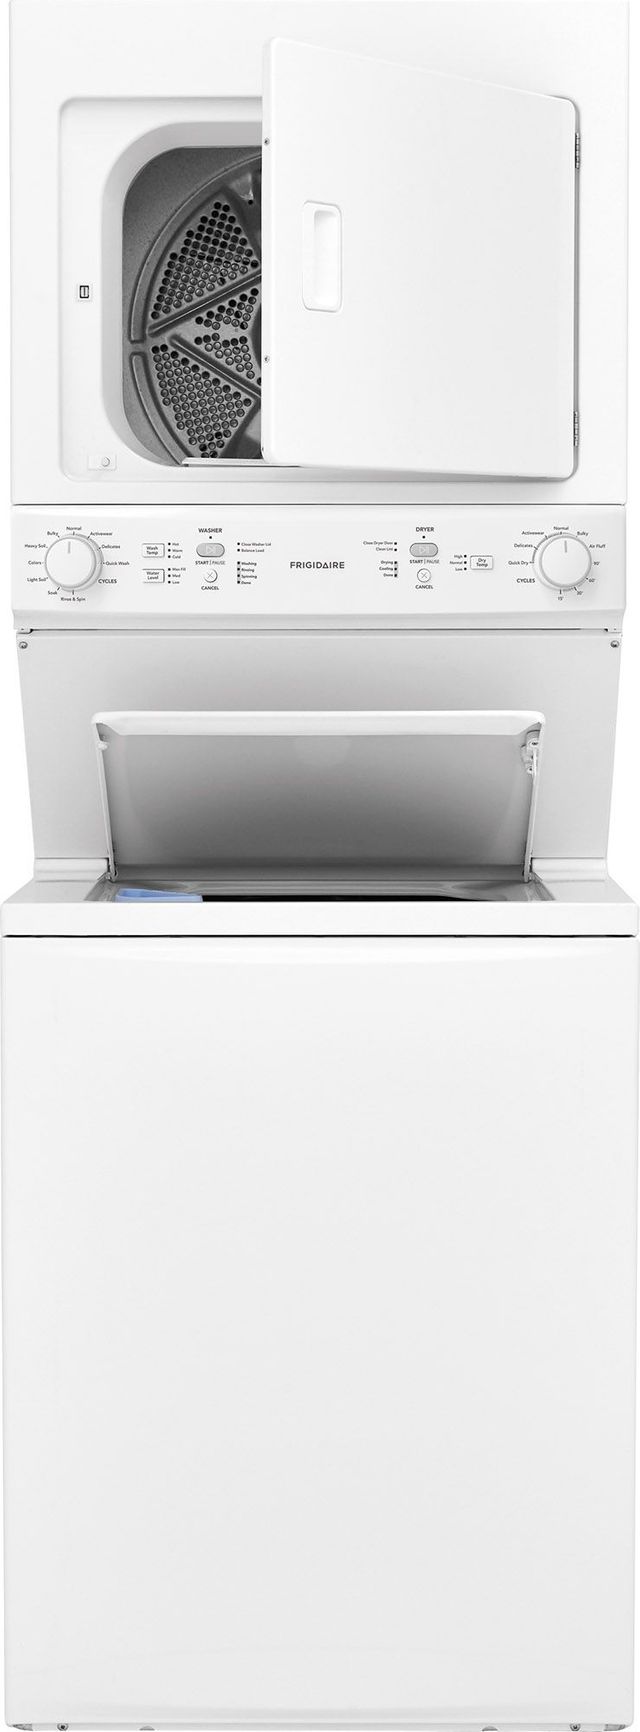 Frigidaire® 3.9 Cu. Ft. Washer, 5.5 cu. Ft. Dryer White Stack Laundry 2